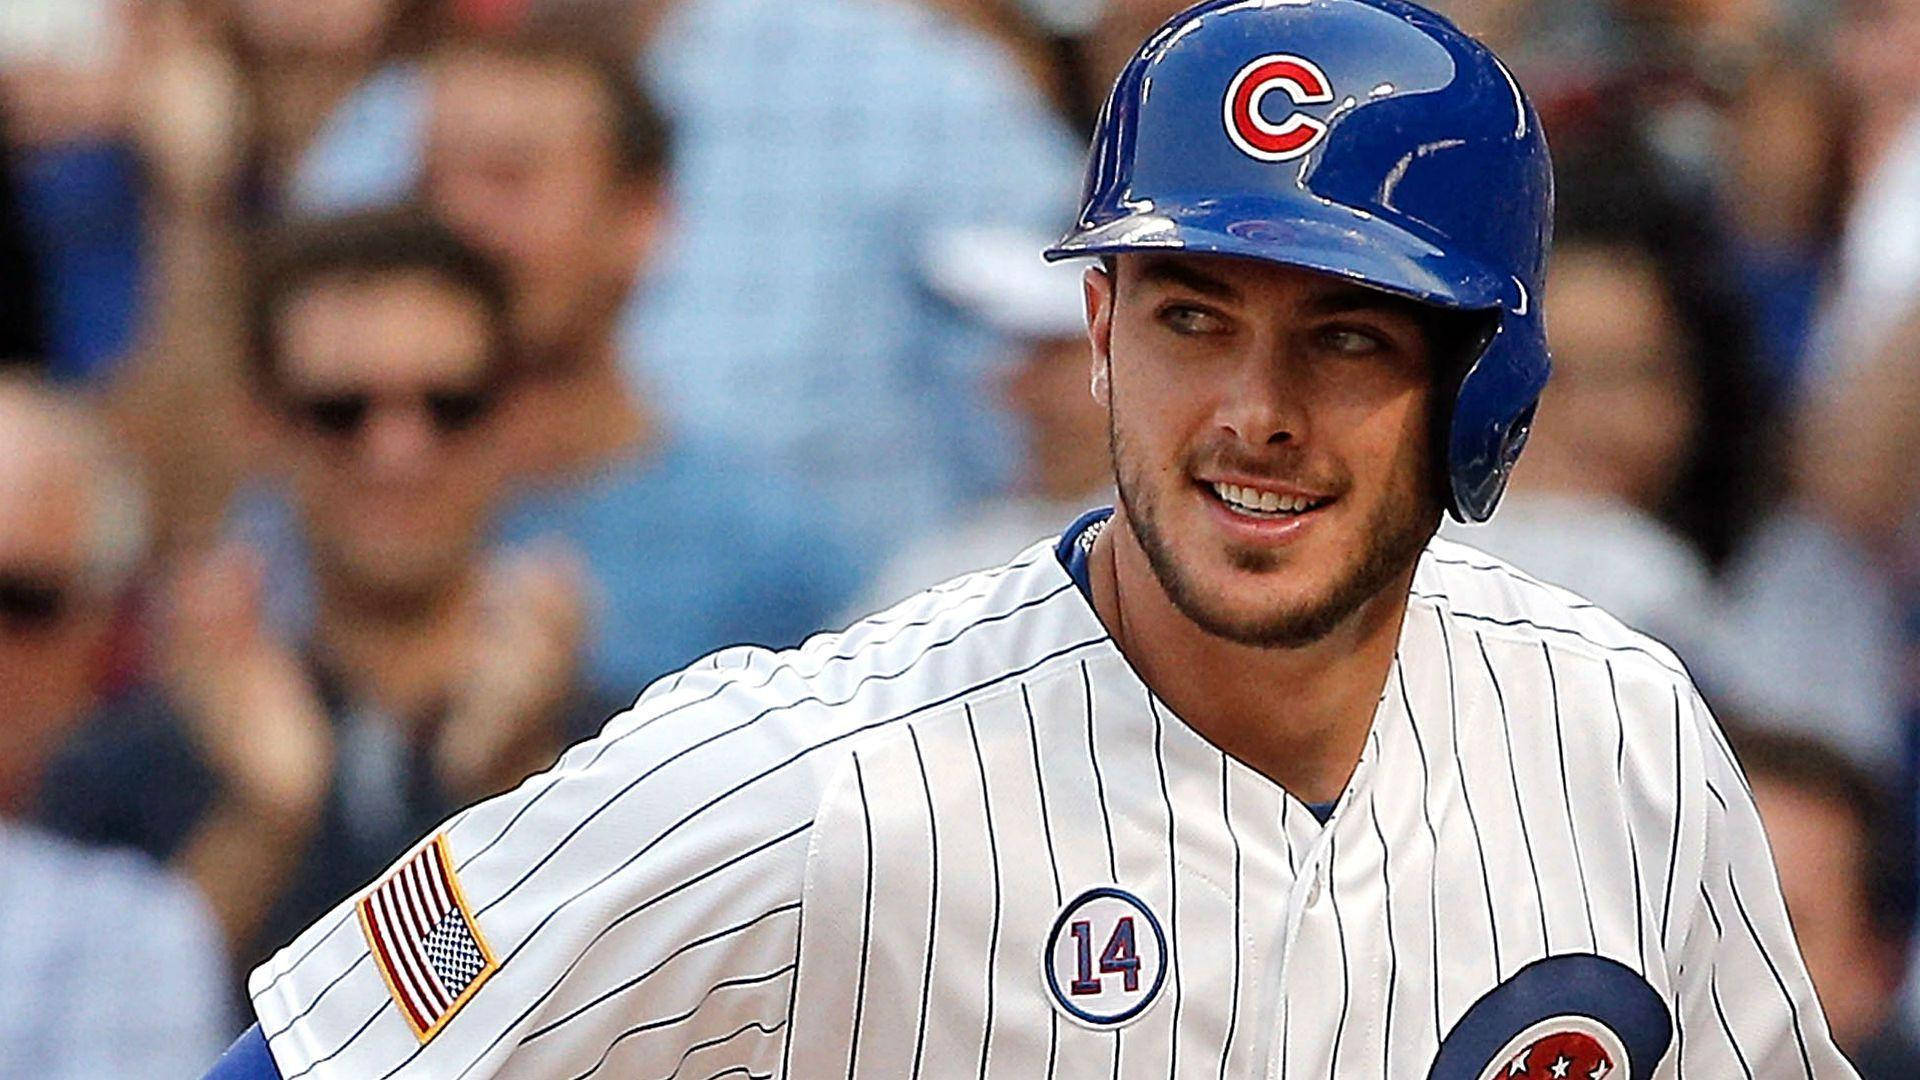 Check out these adorable photos from Kris Bryant's Las Vegas